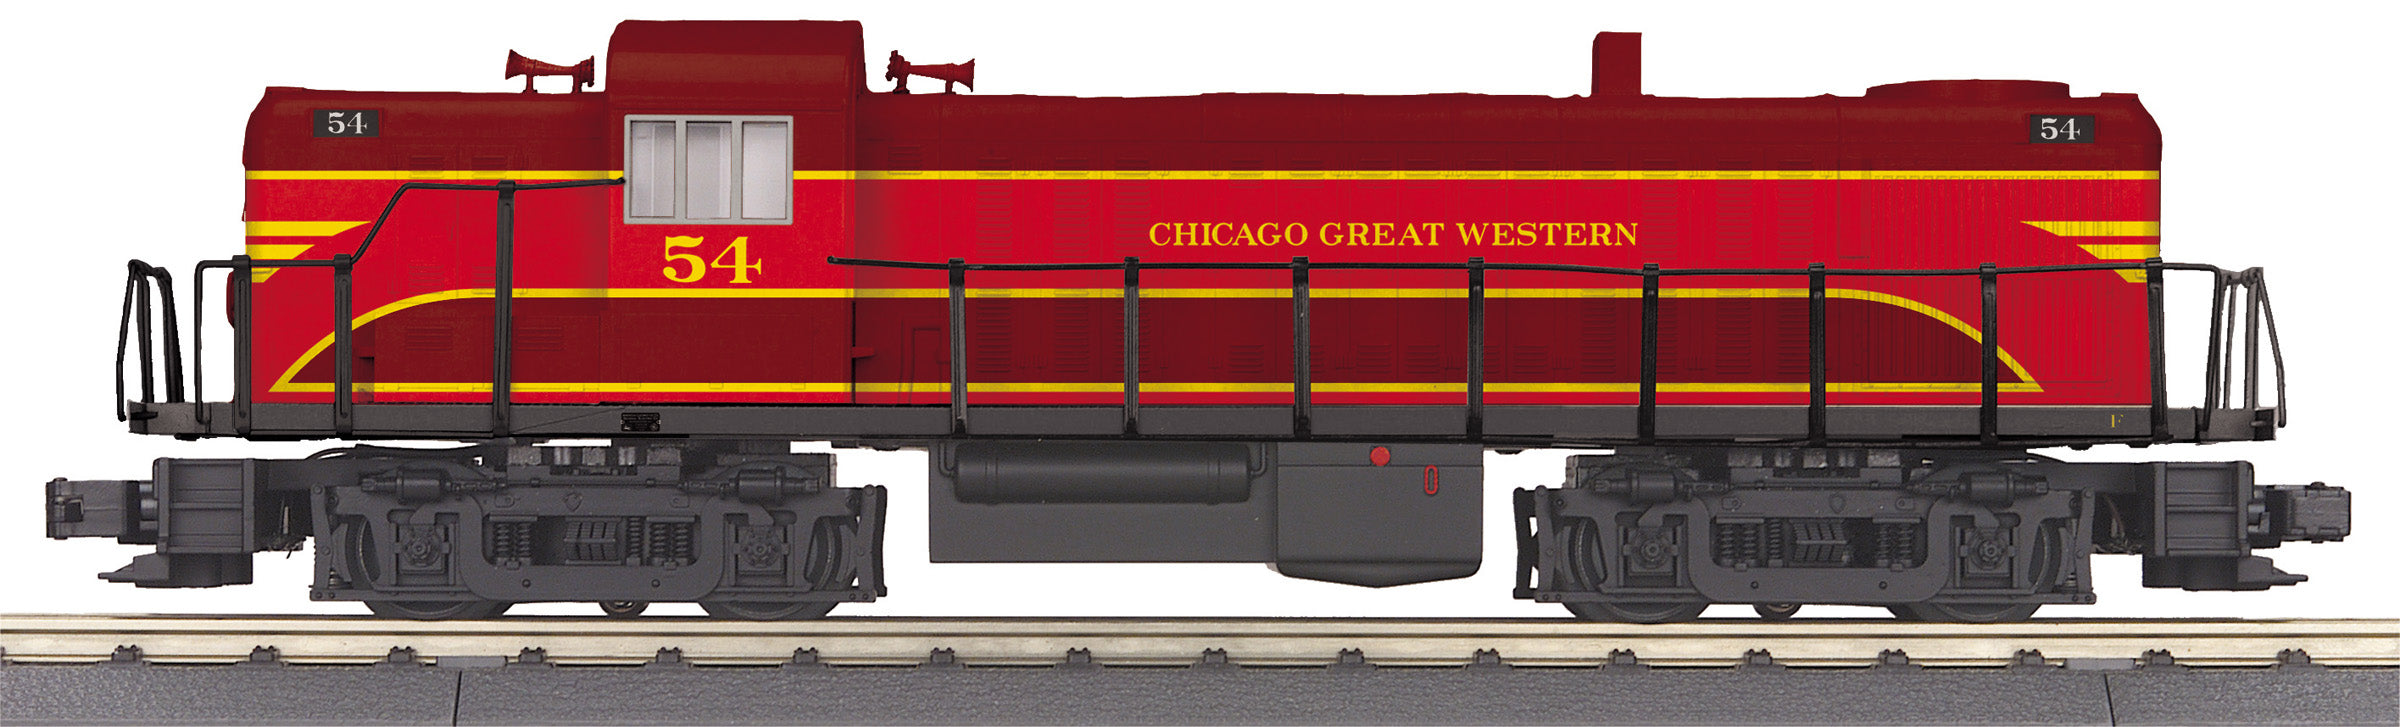 MTH 30-20818-1 - RS-3 Diesel Engine "Chicago Great Western" #54 w/ PS3